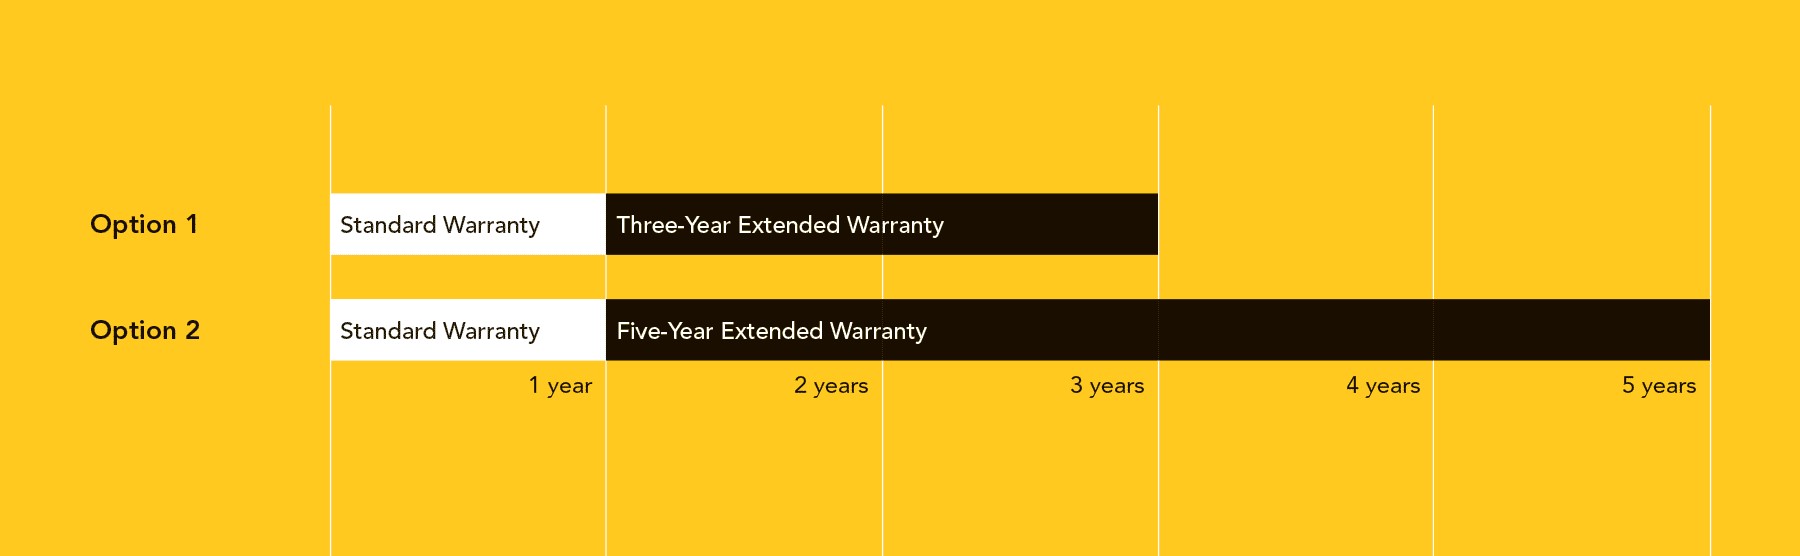 Standard warranty lasts for one year after the product's shipment date. Extended warranties for three and five years after the load cell's shipment date are available.